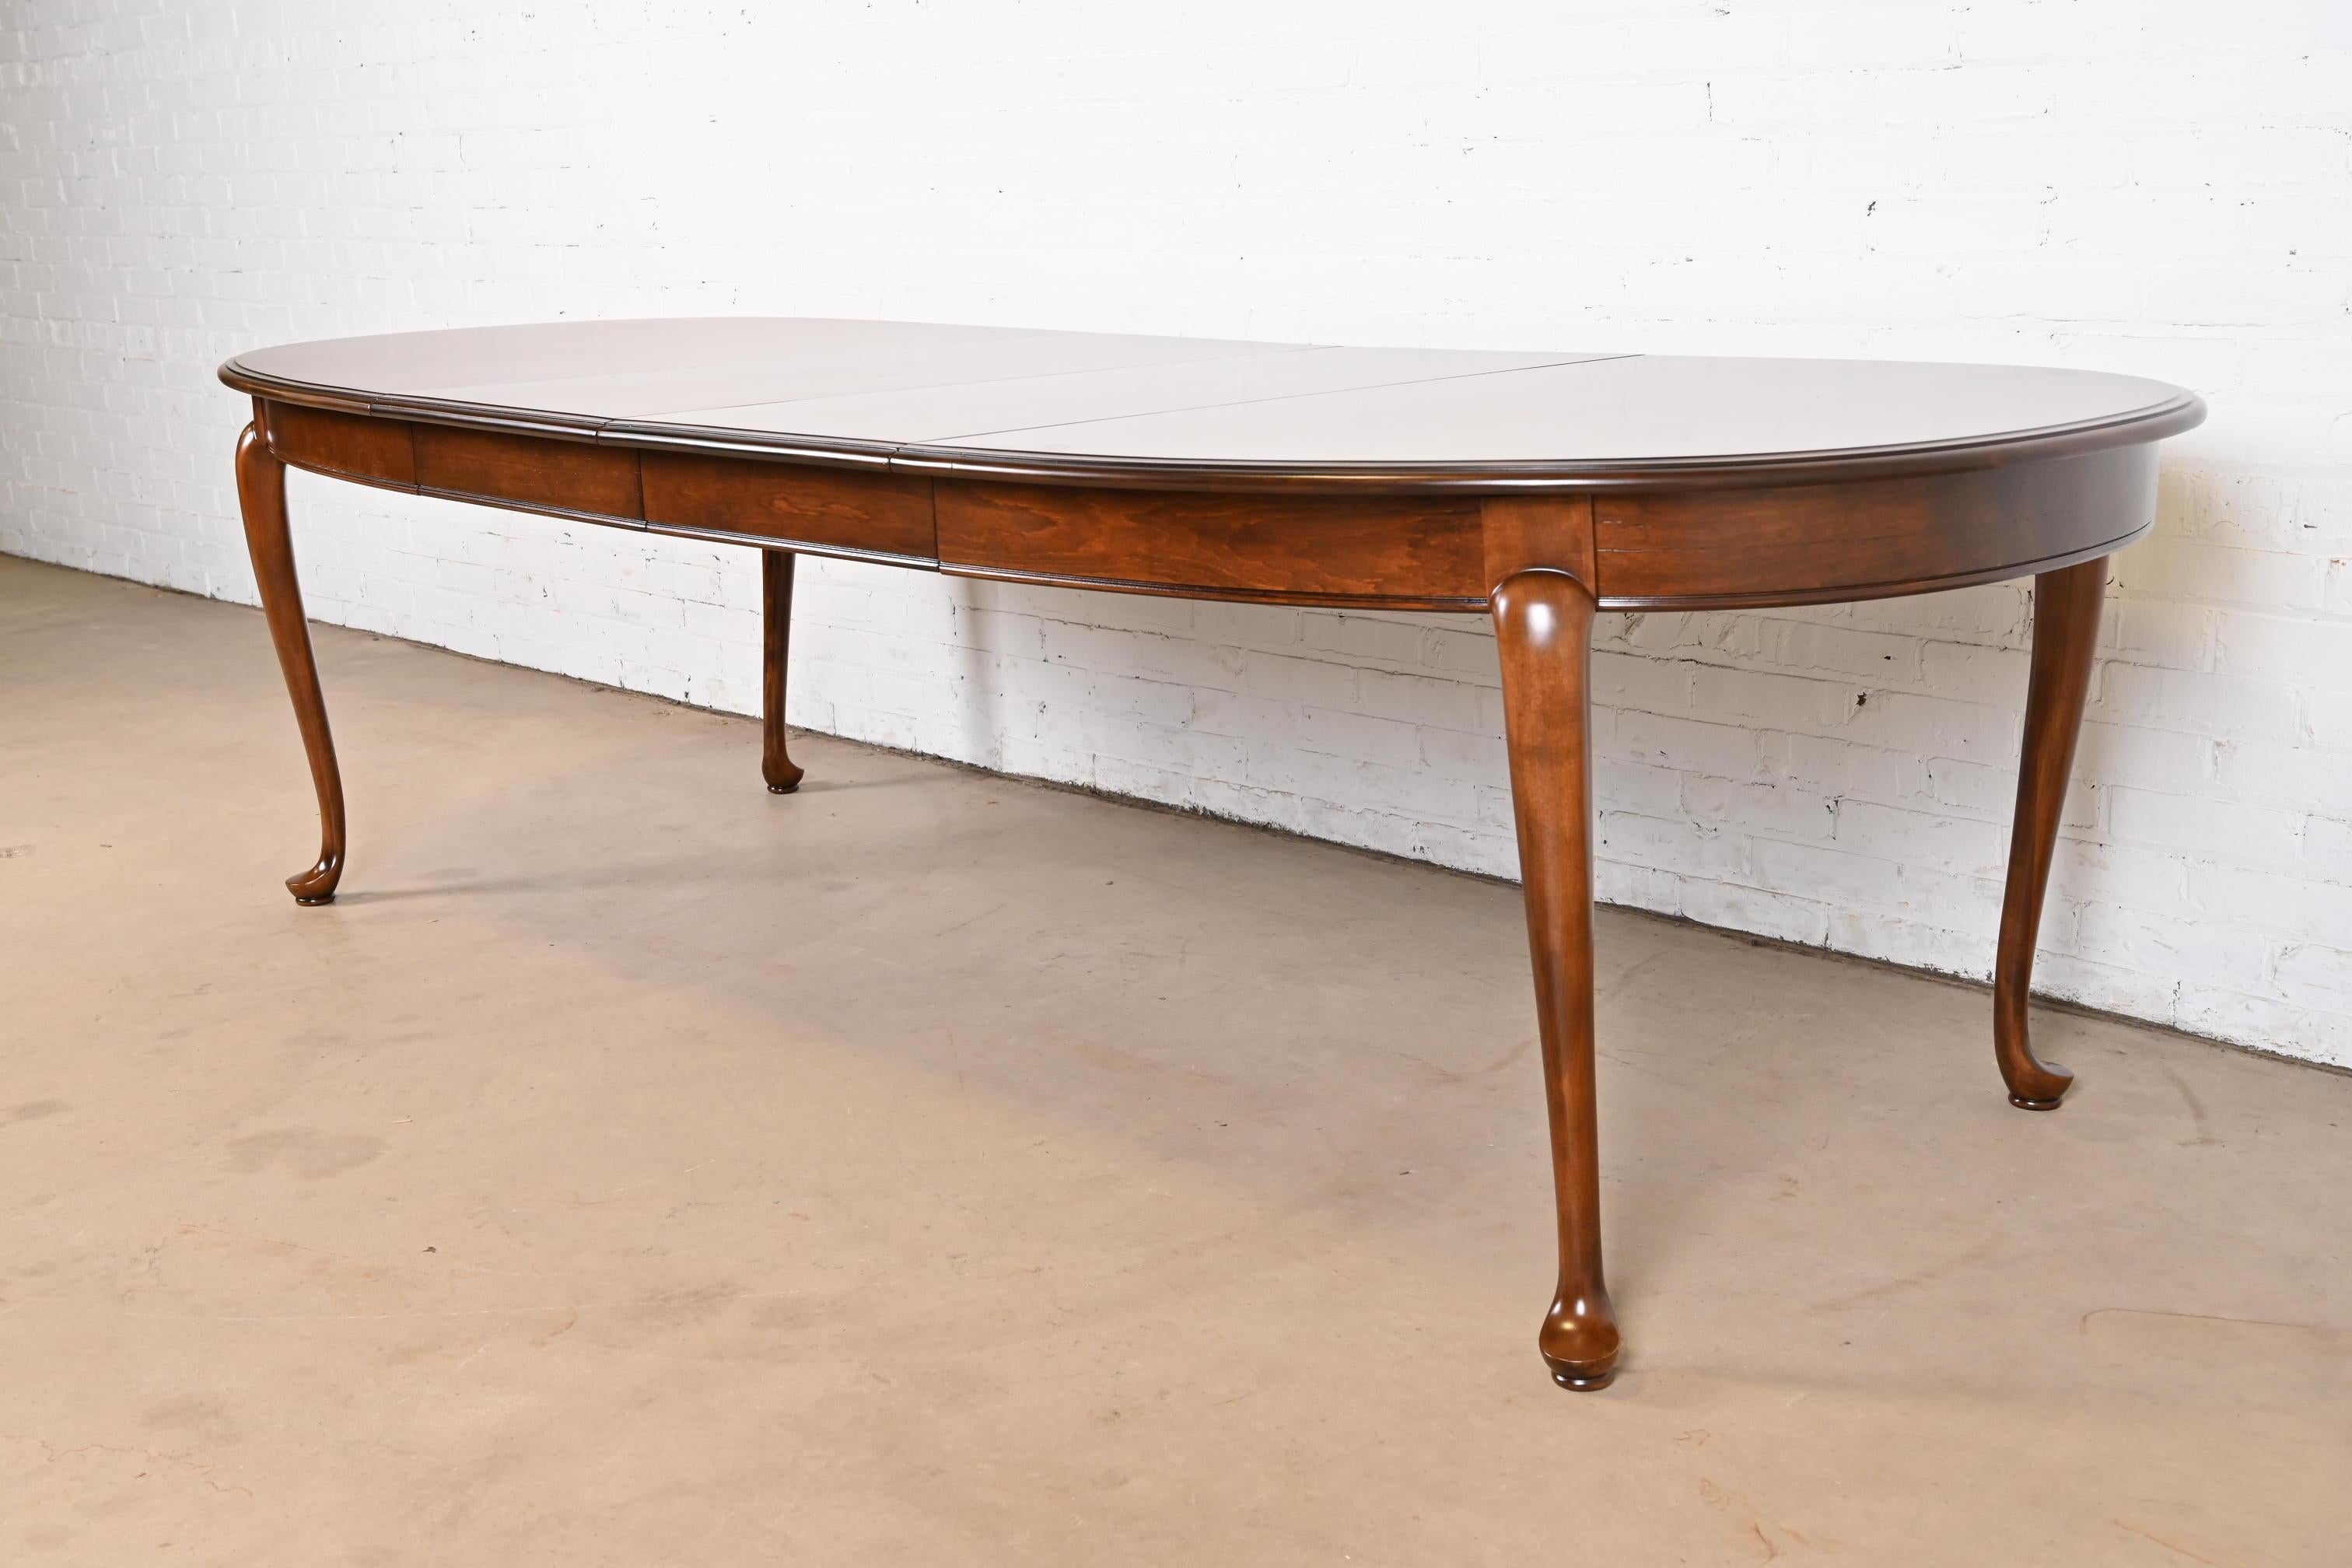 American Queen Anne Solid Cherry Wood Extension Dining Table, Newly Refinished For Sale